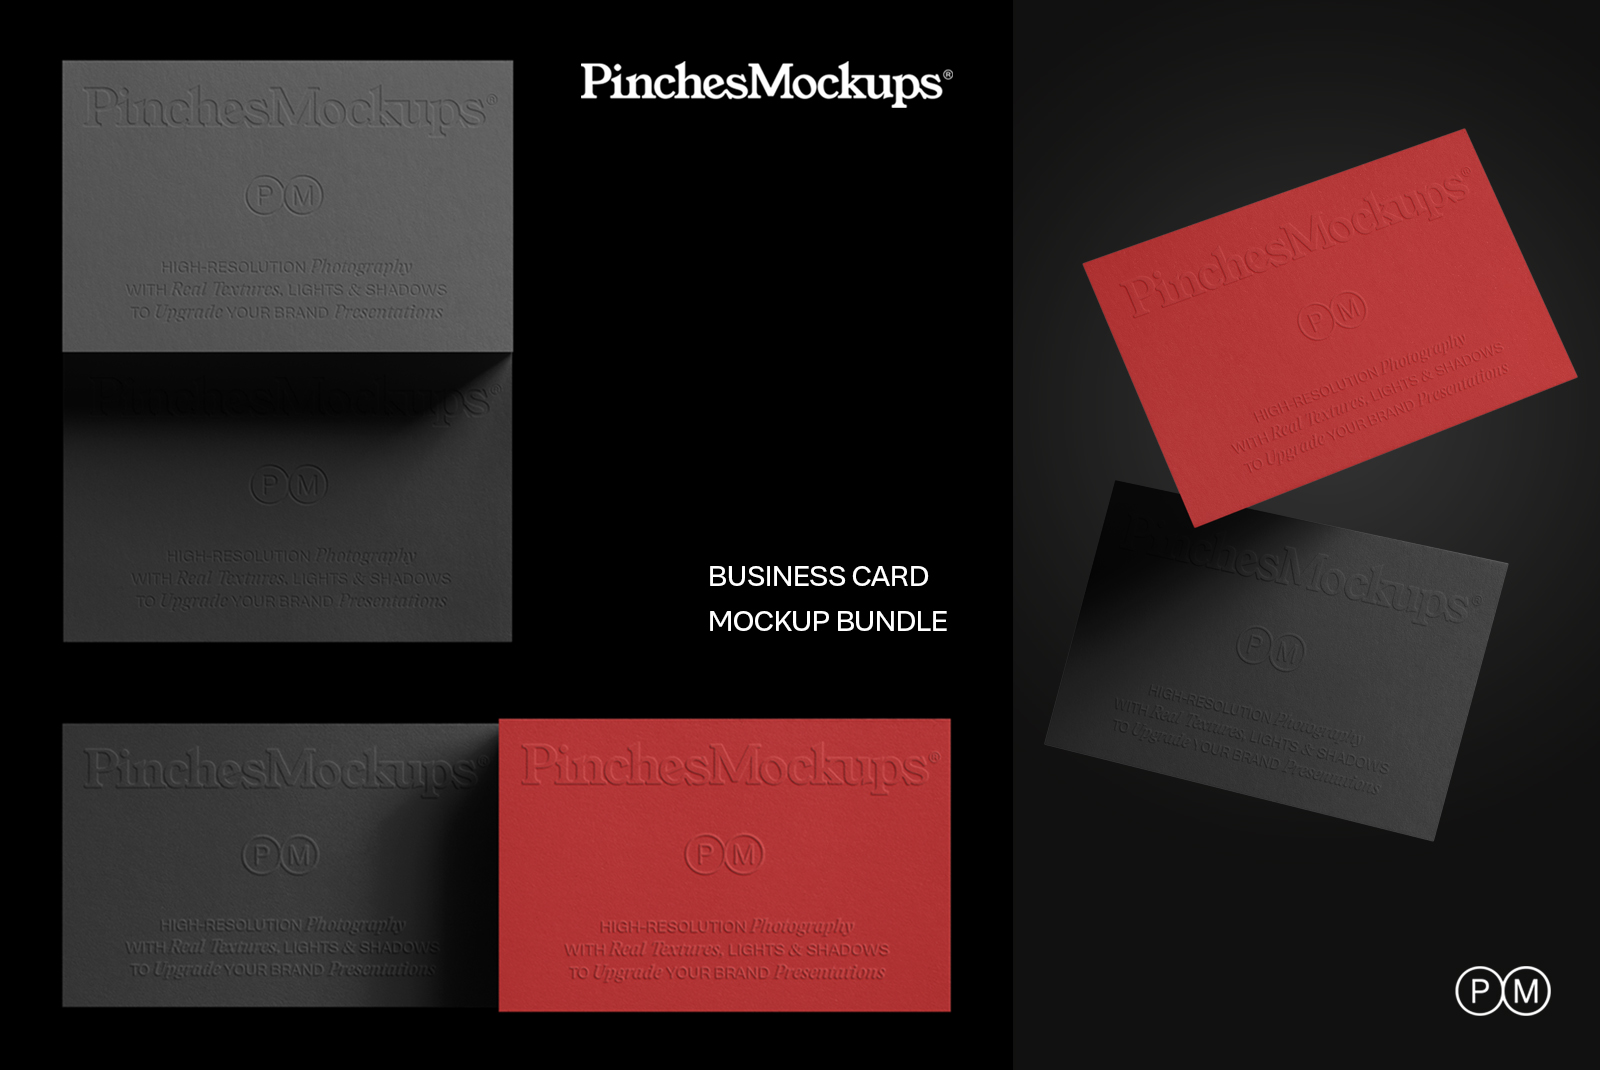 High-quality business card mockup bundle, multiple angles, realistic textures, lighting, and shadows. Ideal asset for designer presentations.